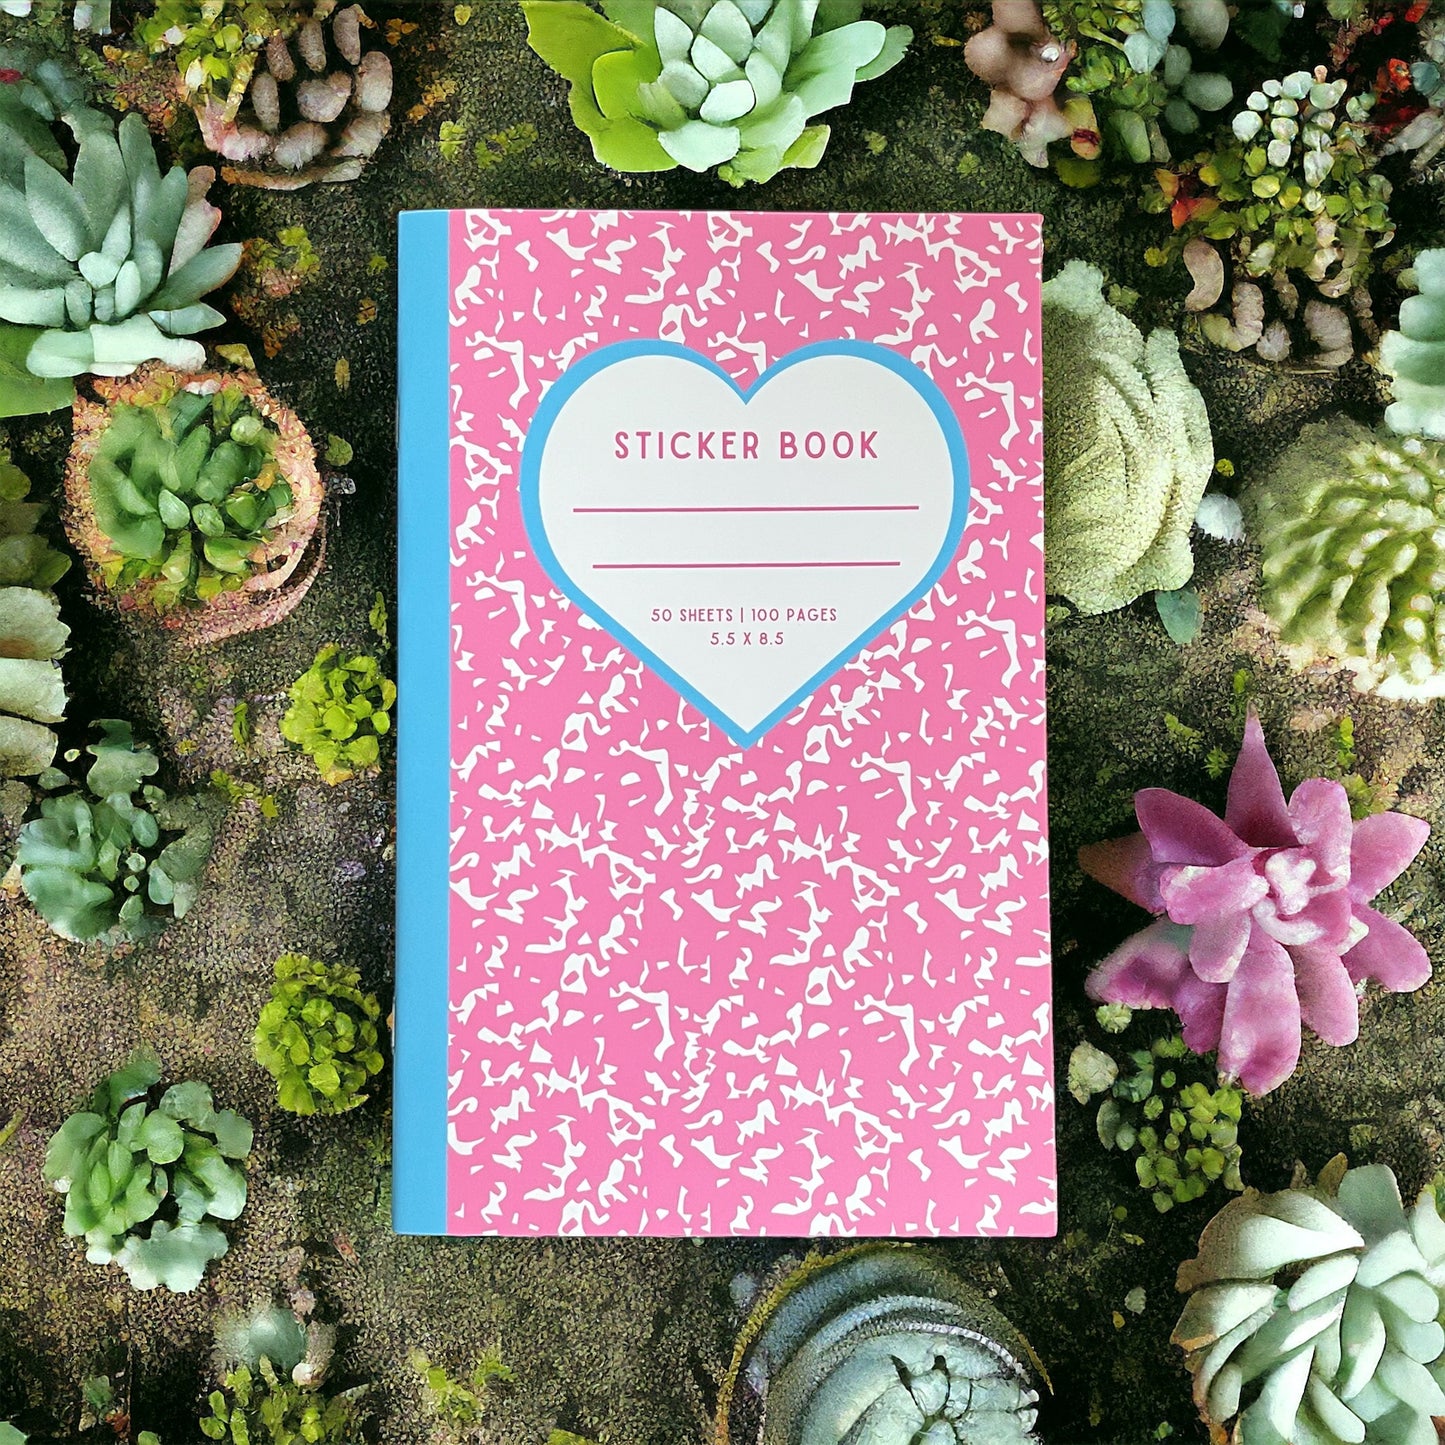 Reusable Sticker Book - Pink Sticker Collecting Book, 40 Pages, 5.5 x 8.5 inches - Functional and Efficient for Sticker Enthusiasts